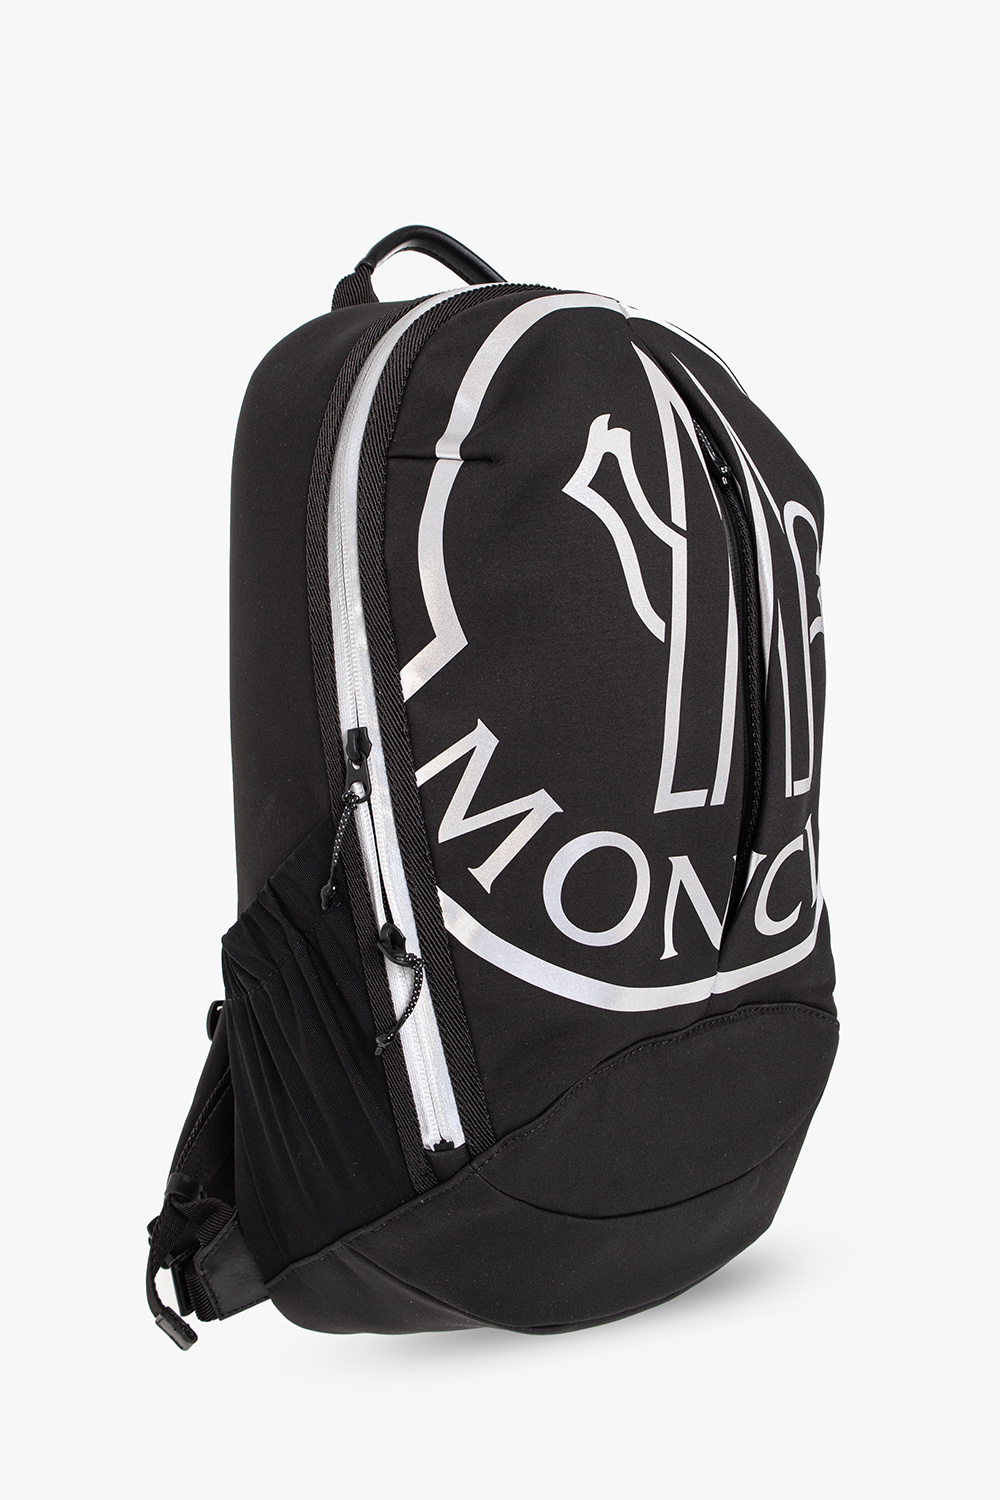 Moncler ‘Cut’ backpack with logo